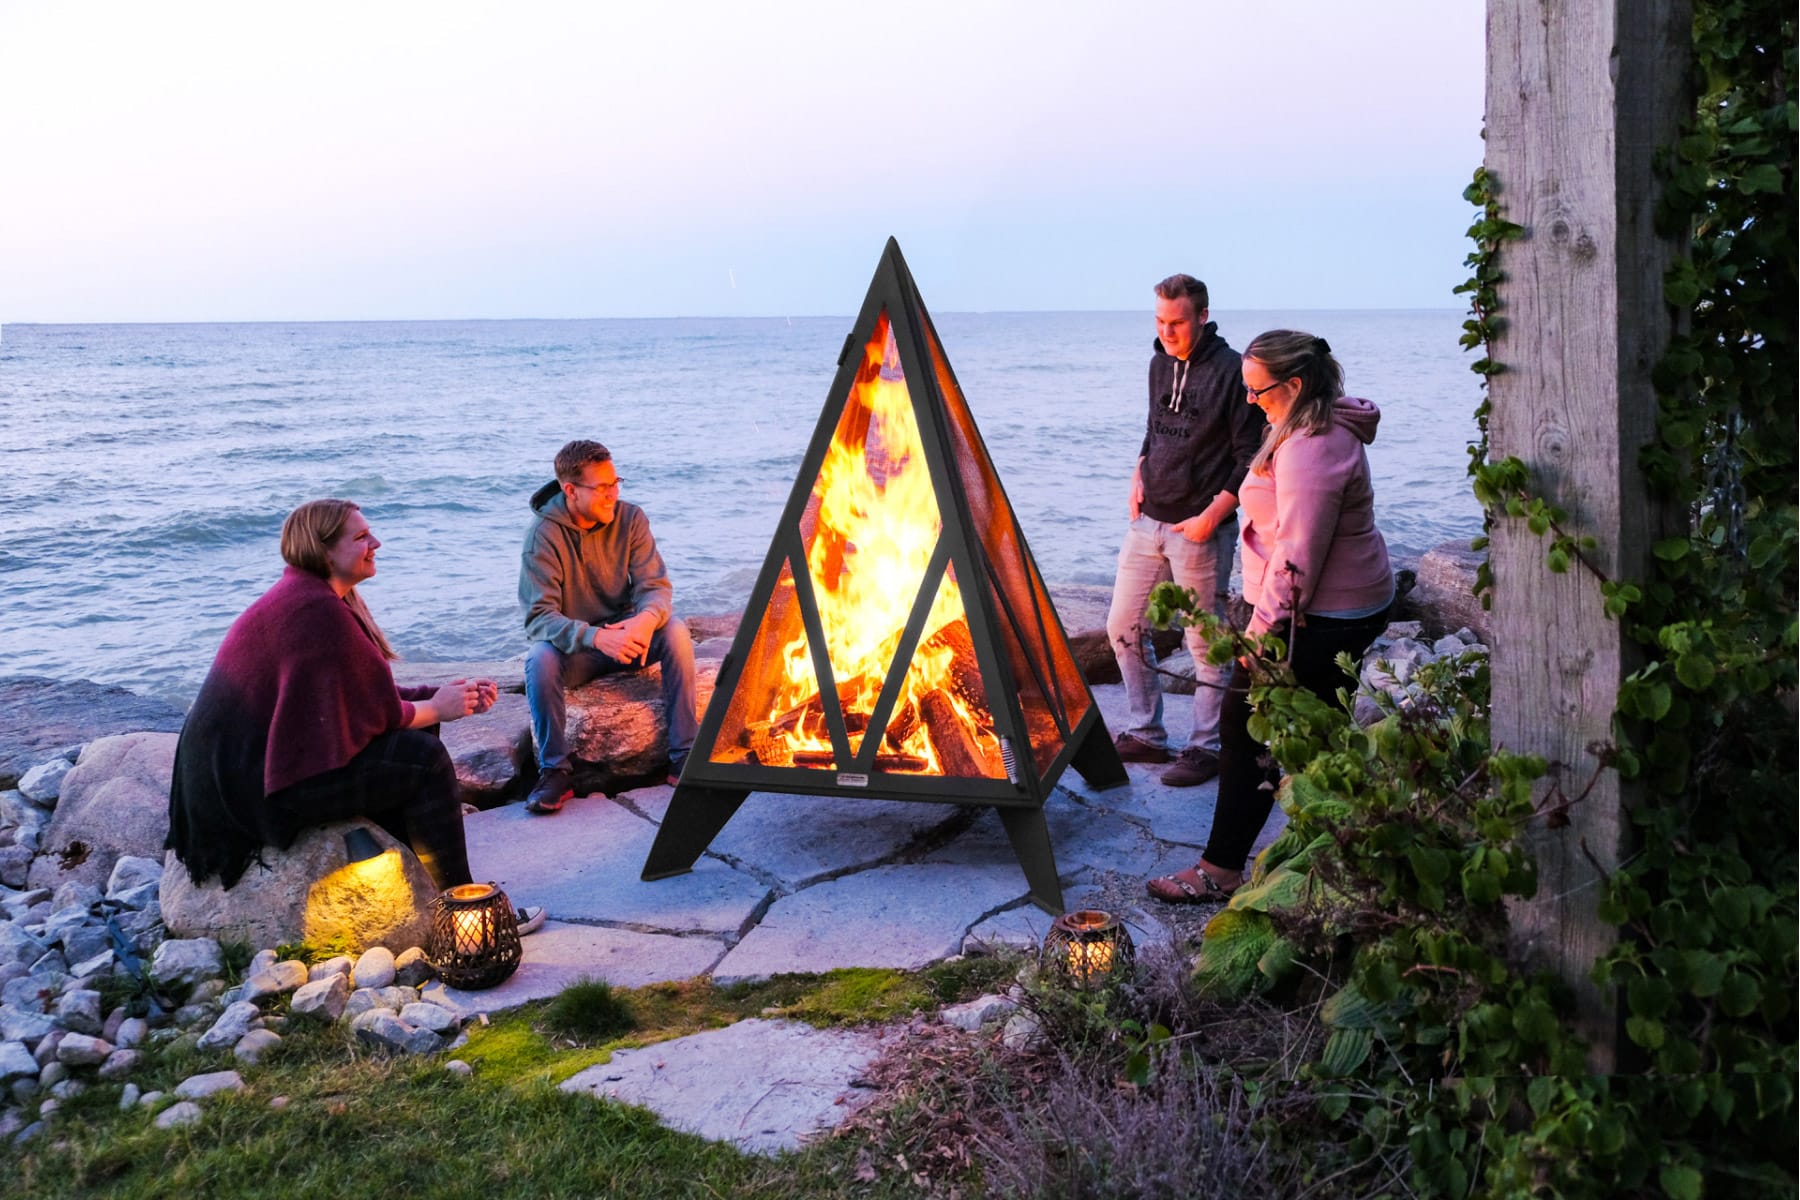 People gathered around large pyramid fire pit